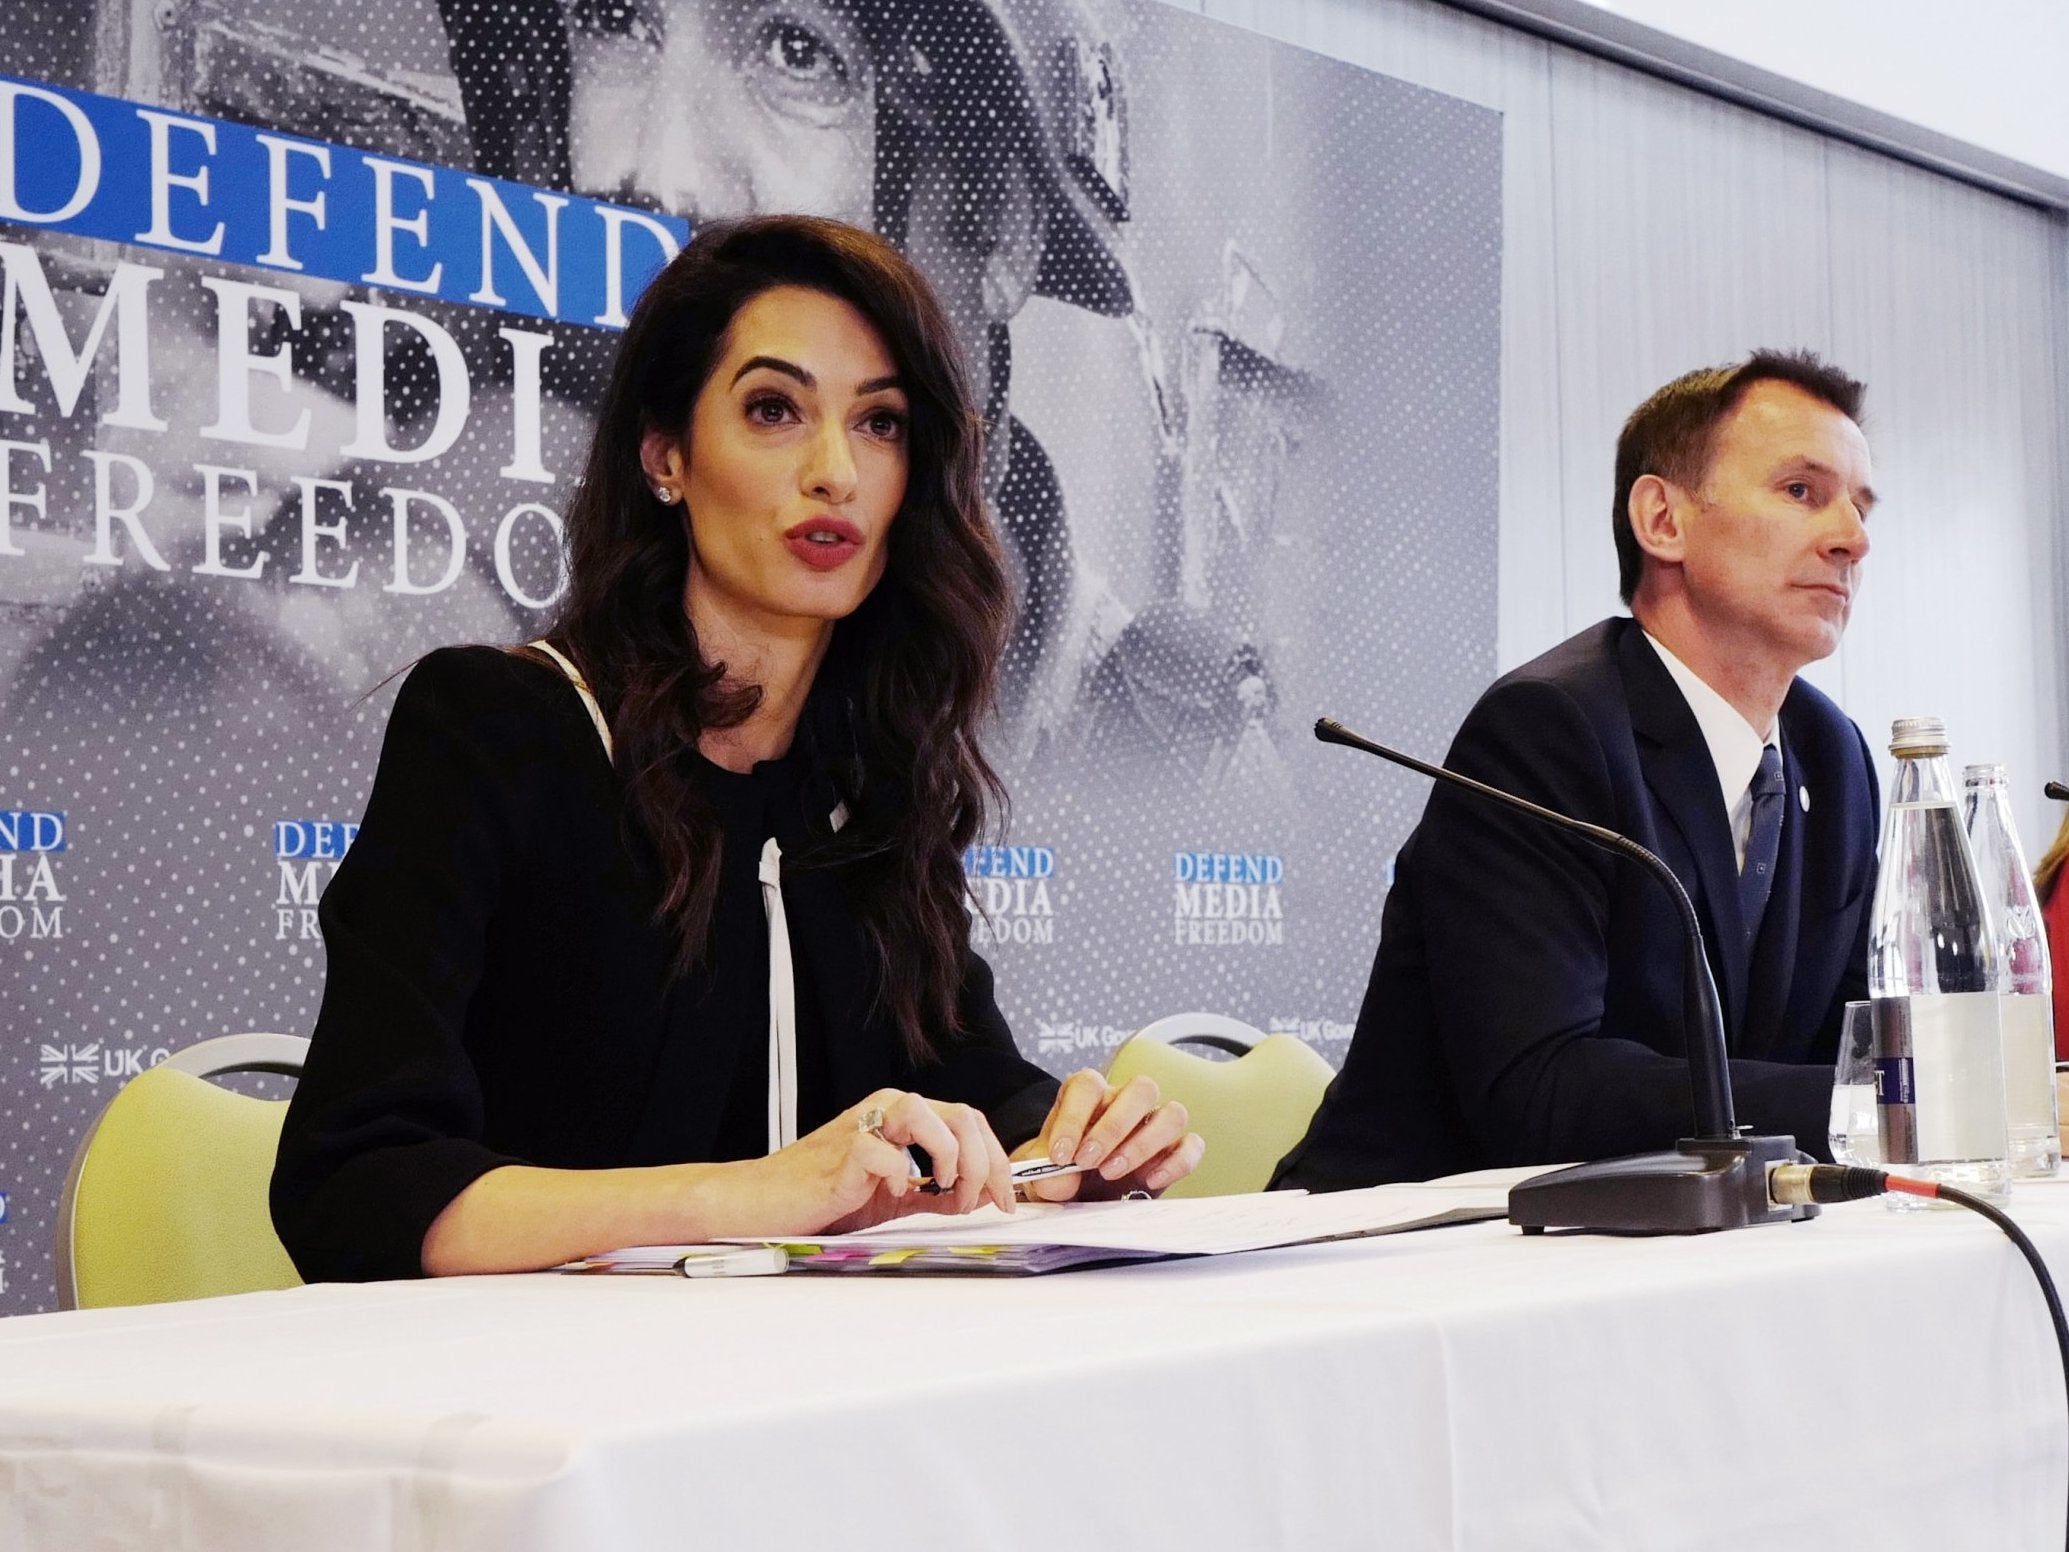 Barrister Amal Clooney with foreign secretary Jeremy Hunt at media freedom event on 5 April